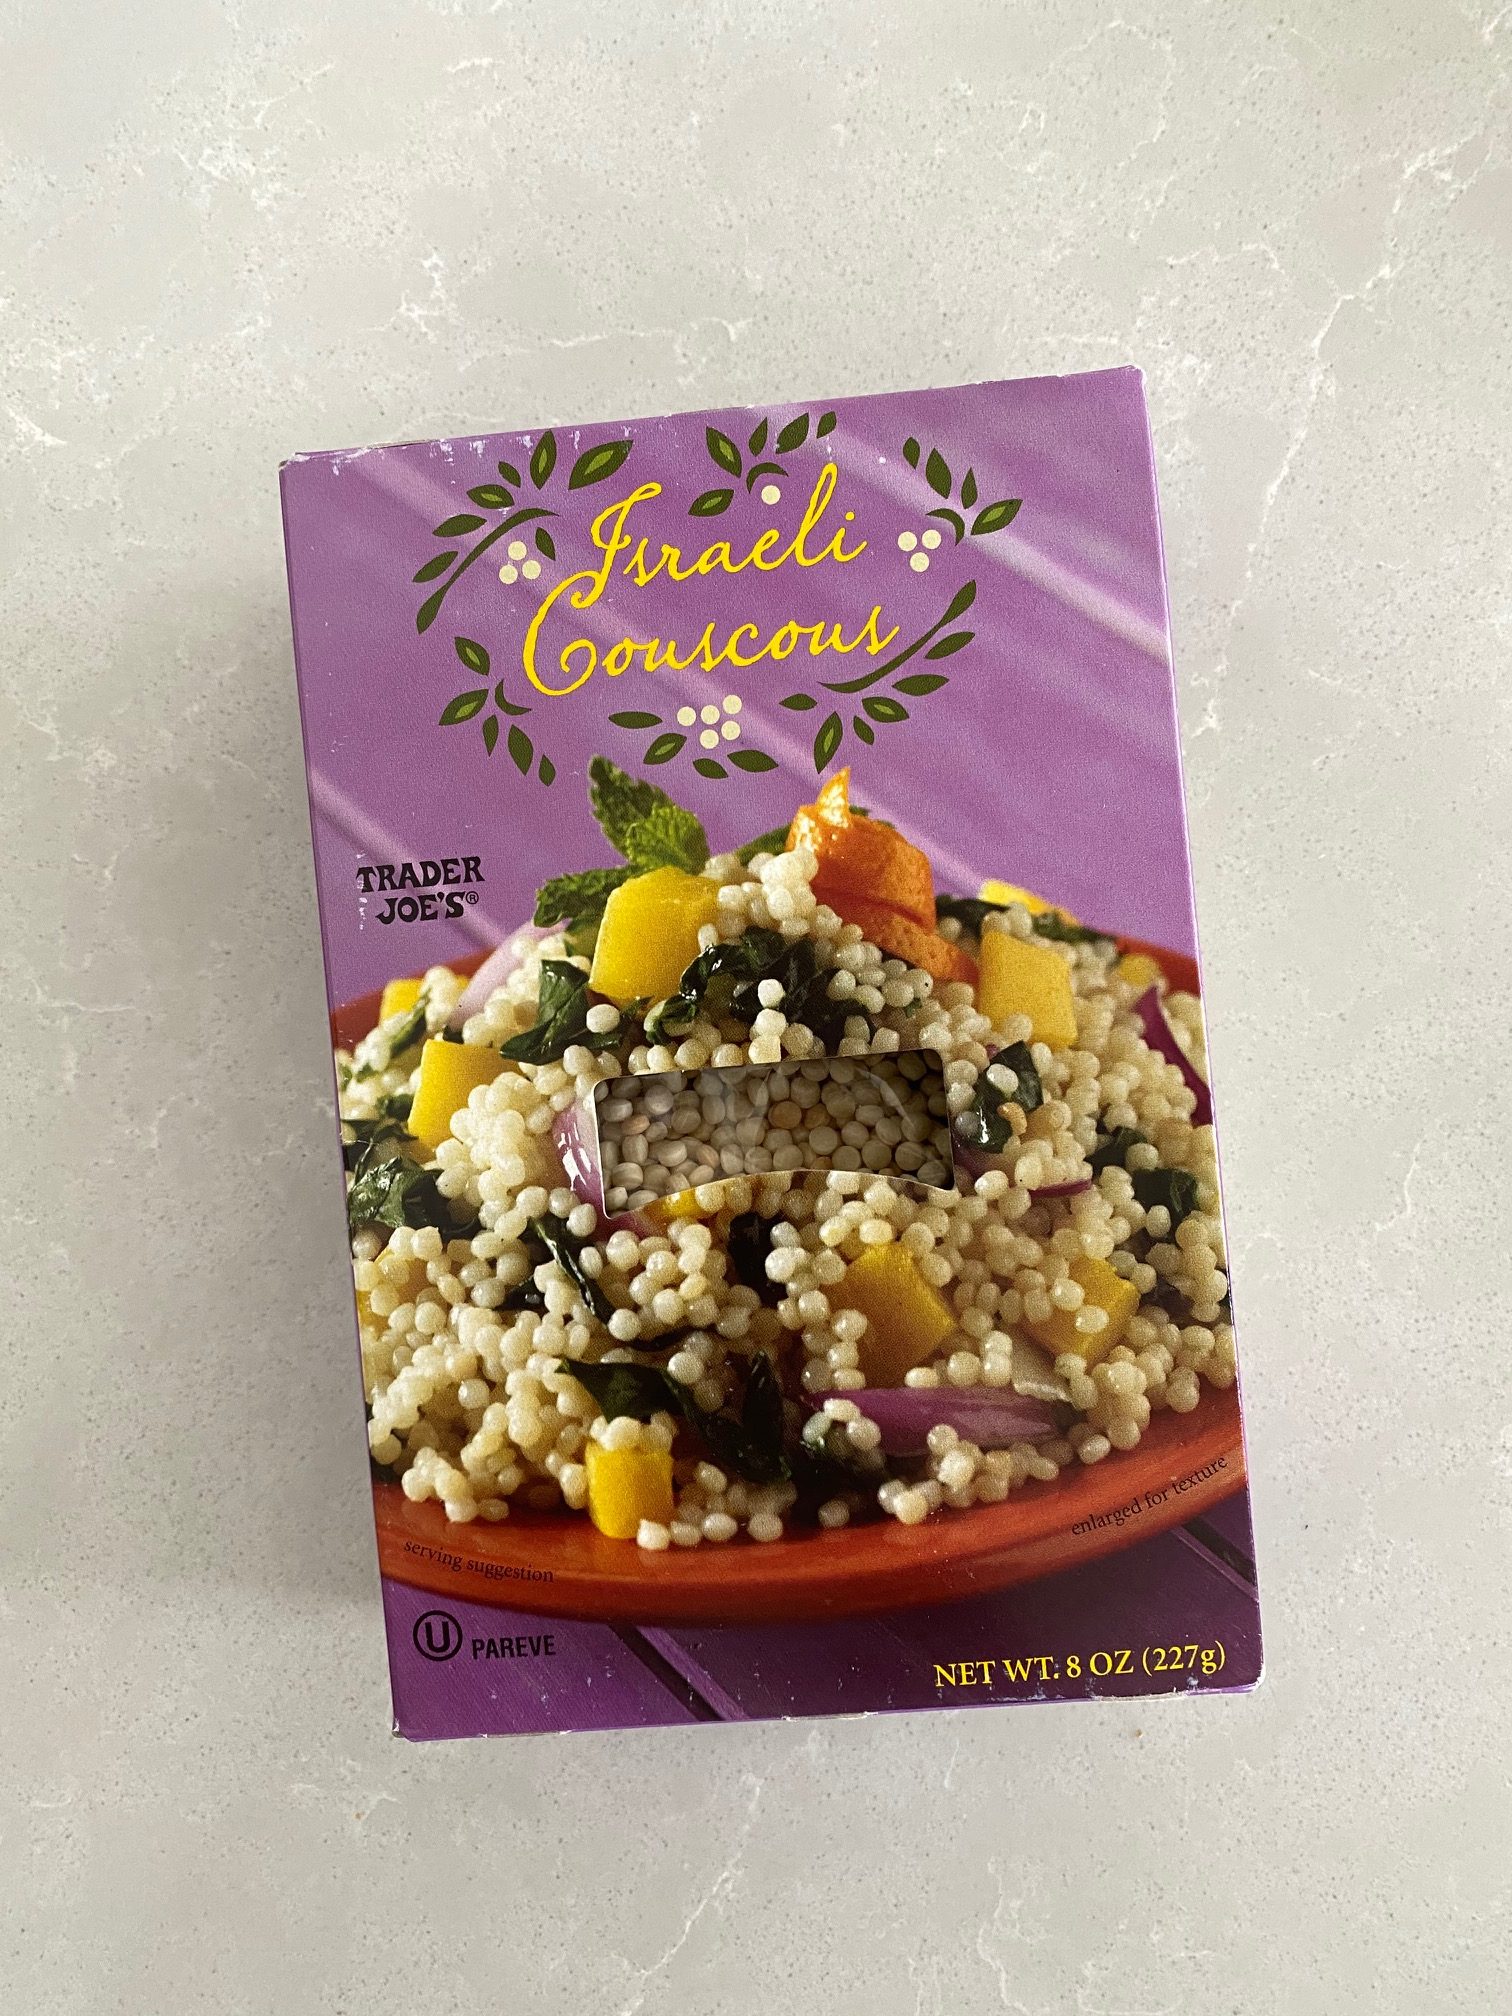 Isreali Couscous From Trader Joes The Gr Guide